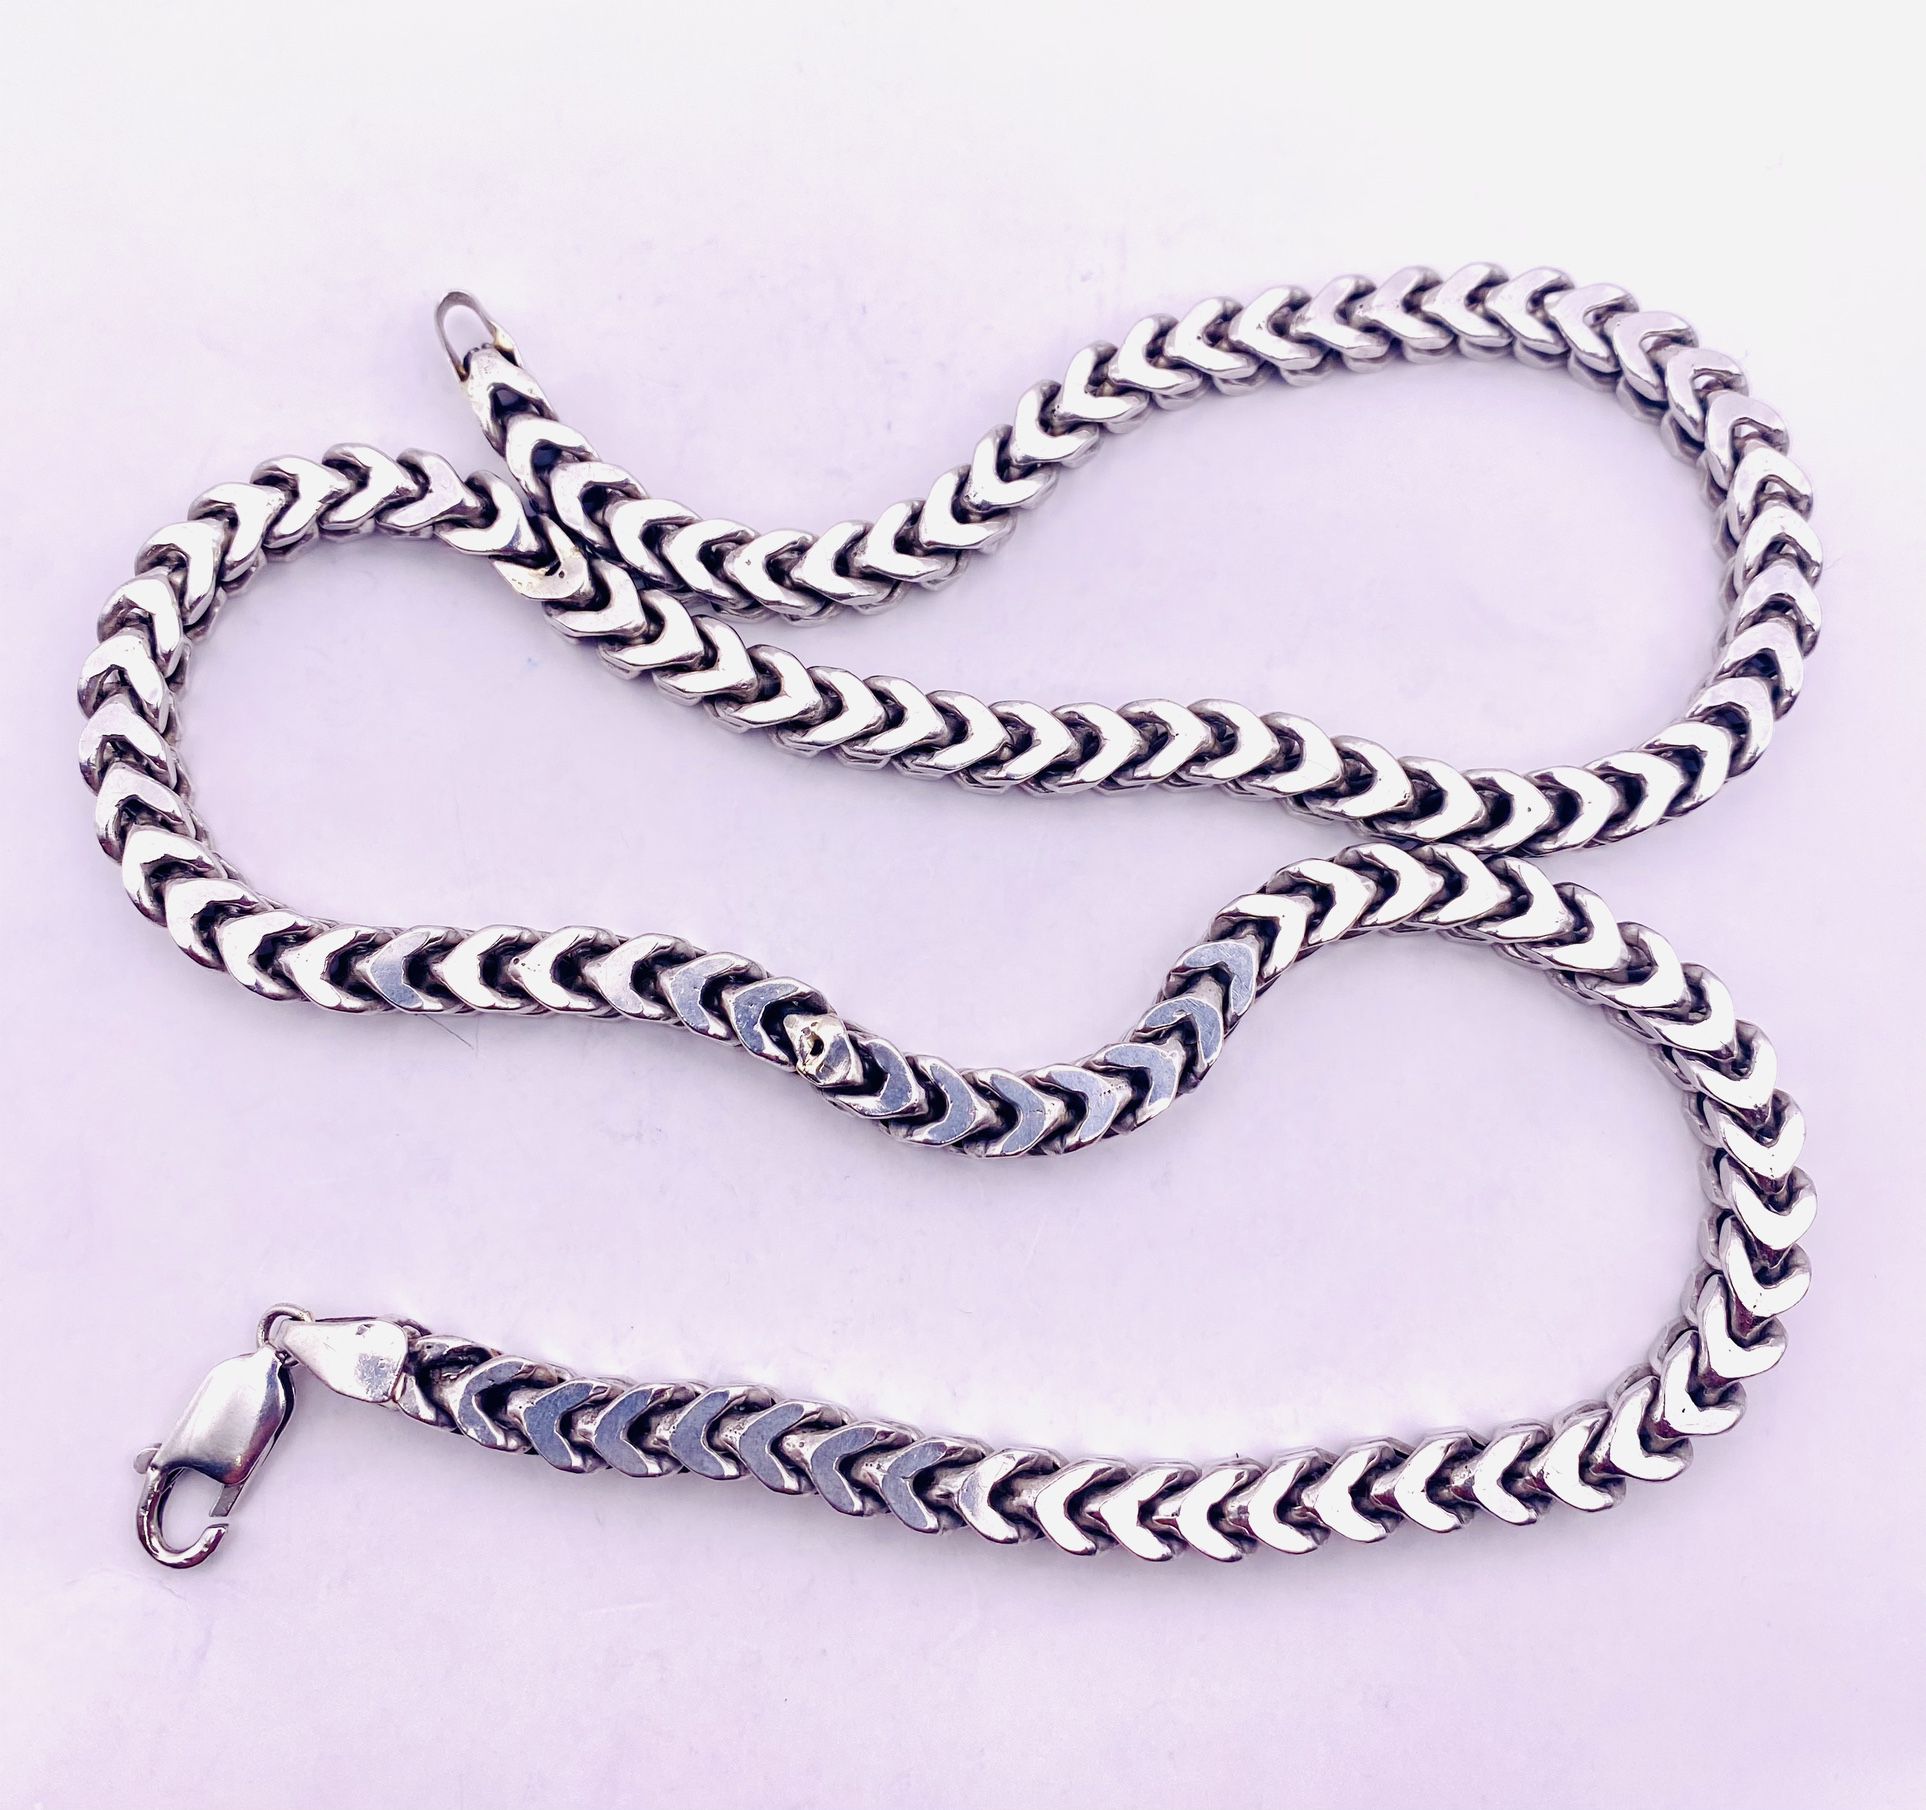 Sterling Silver Franco Link Chain Necklace Stamped 925